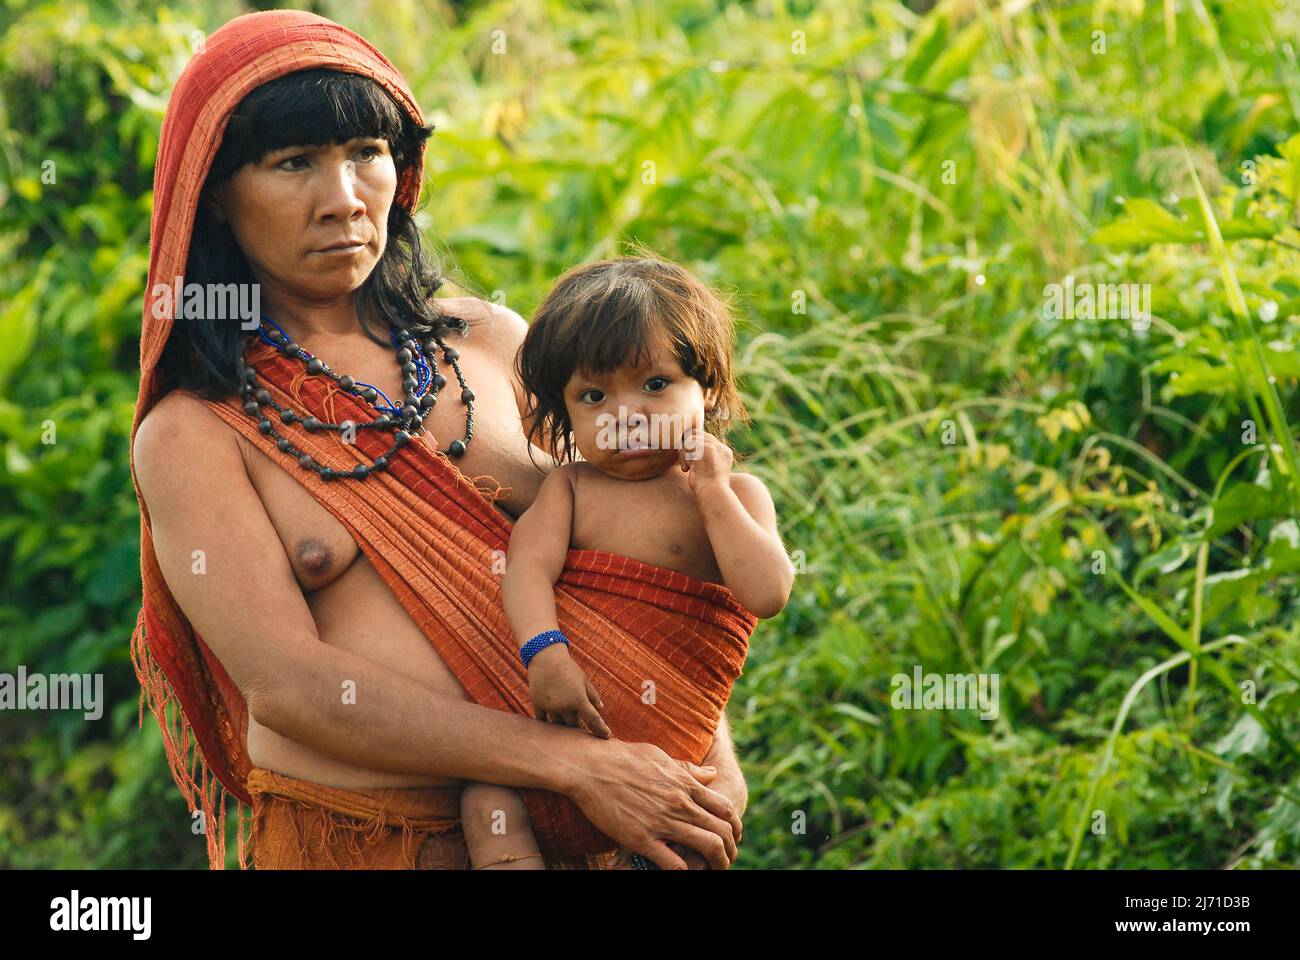 Indian mother from the Arawete Amazon tribe in Brazil carrying baby on a sling, 2007. Stock Photo